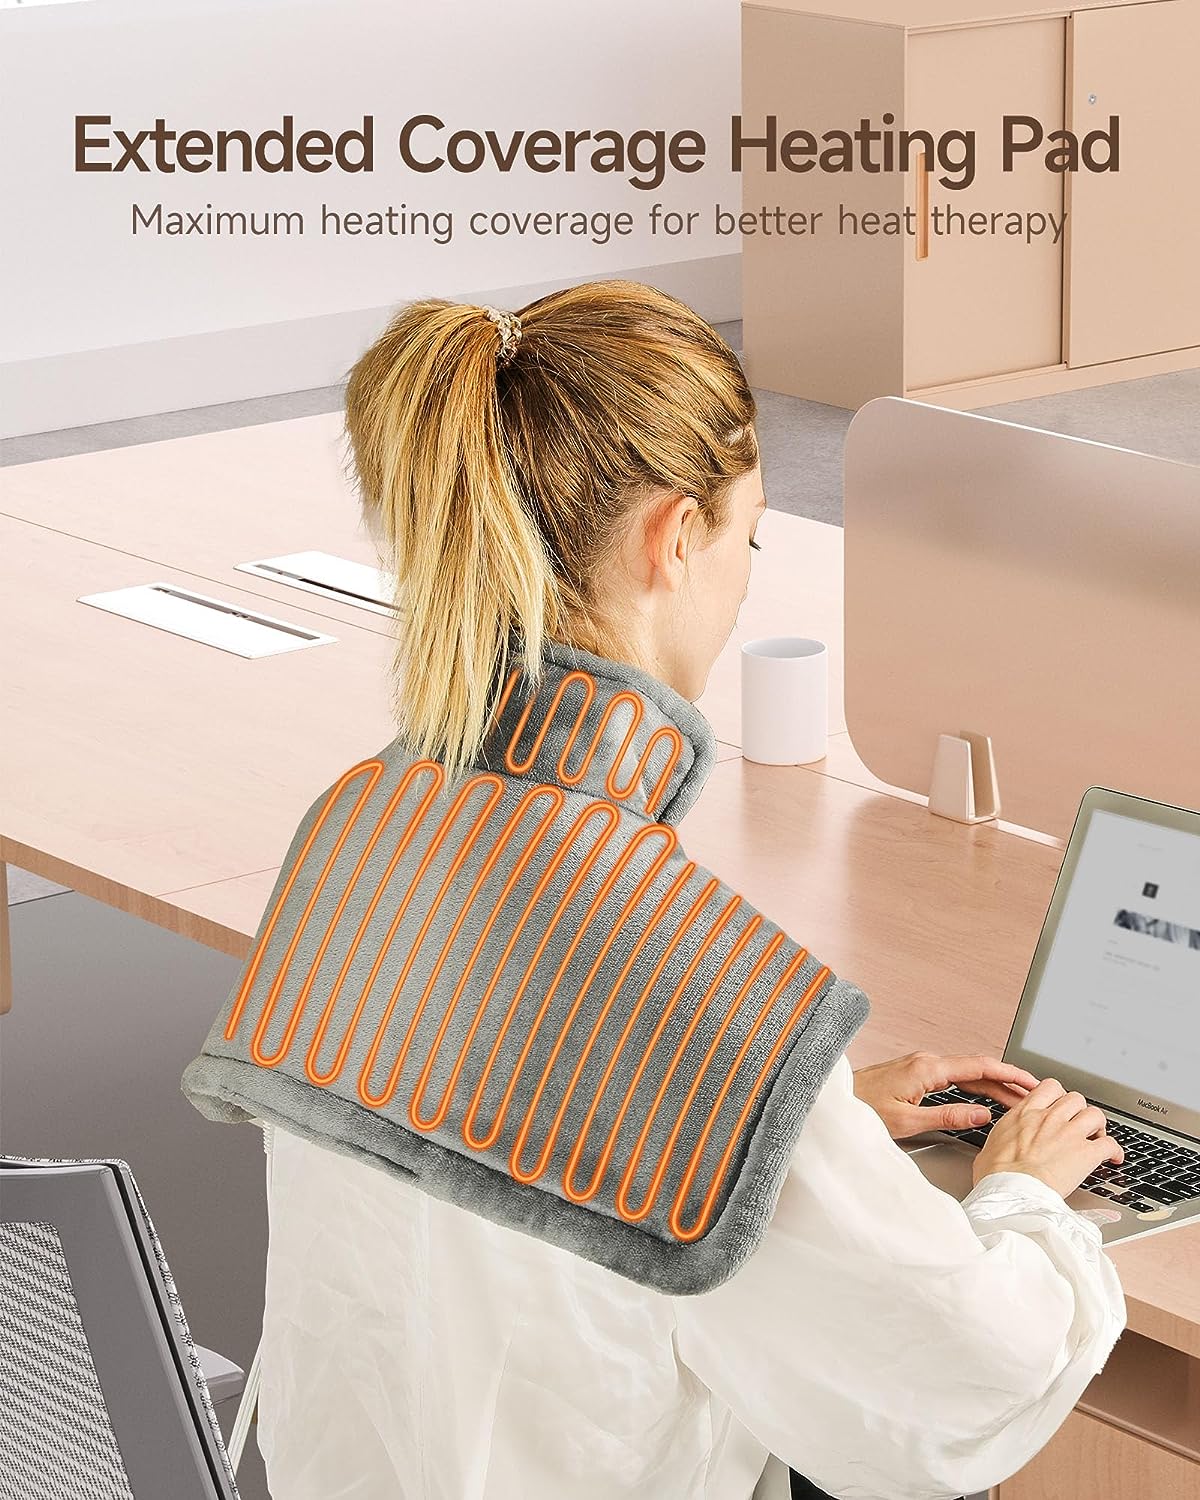 ALLJOY Extra-Large 24x17" Neck and Shoulder Heating Pad